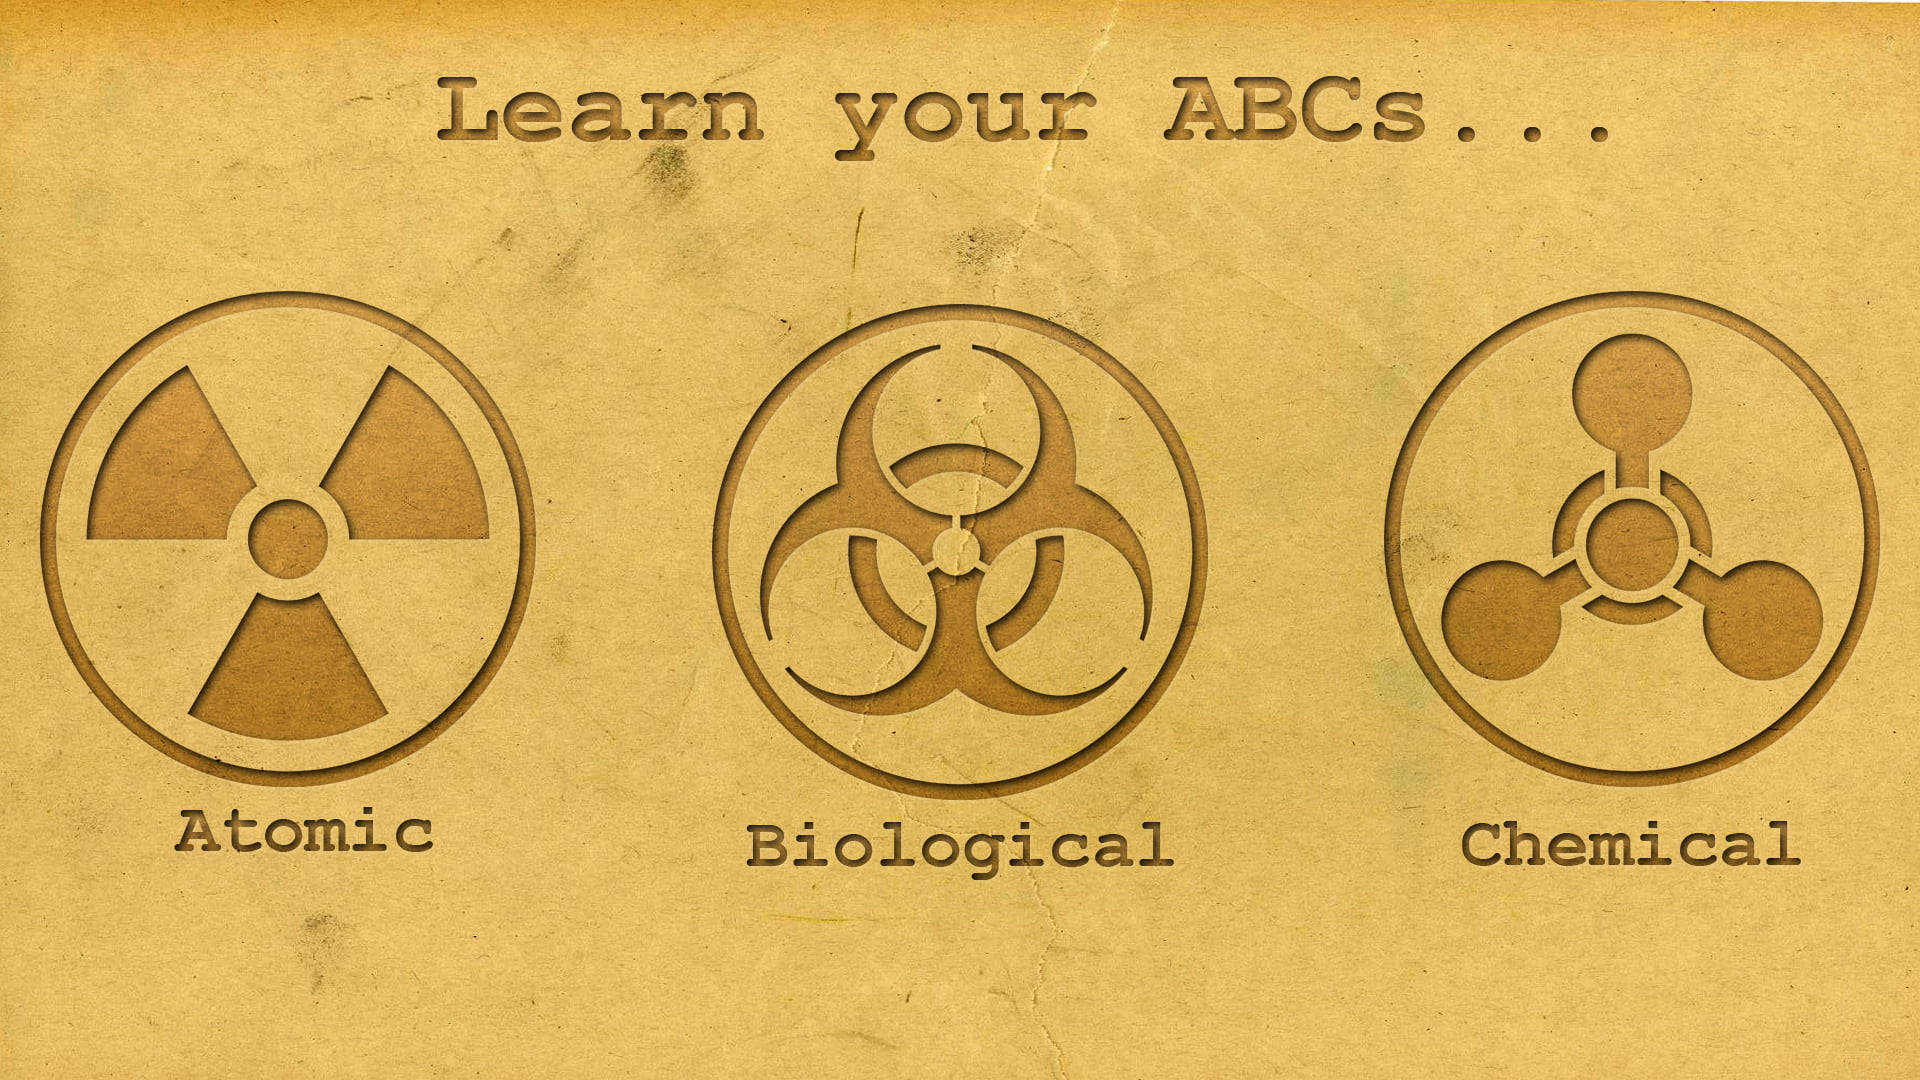 Abc Atomic Biological And Chemical Logos Background